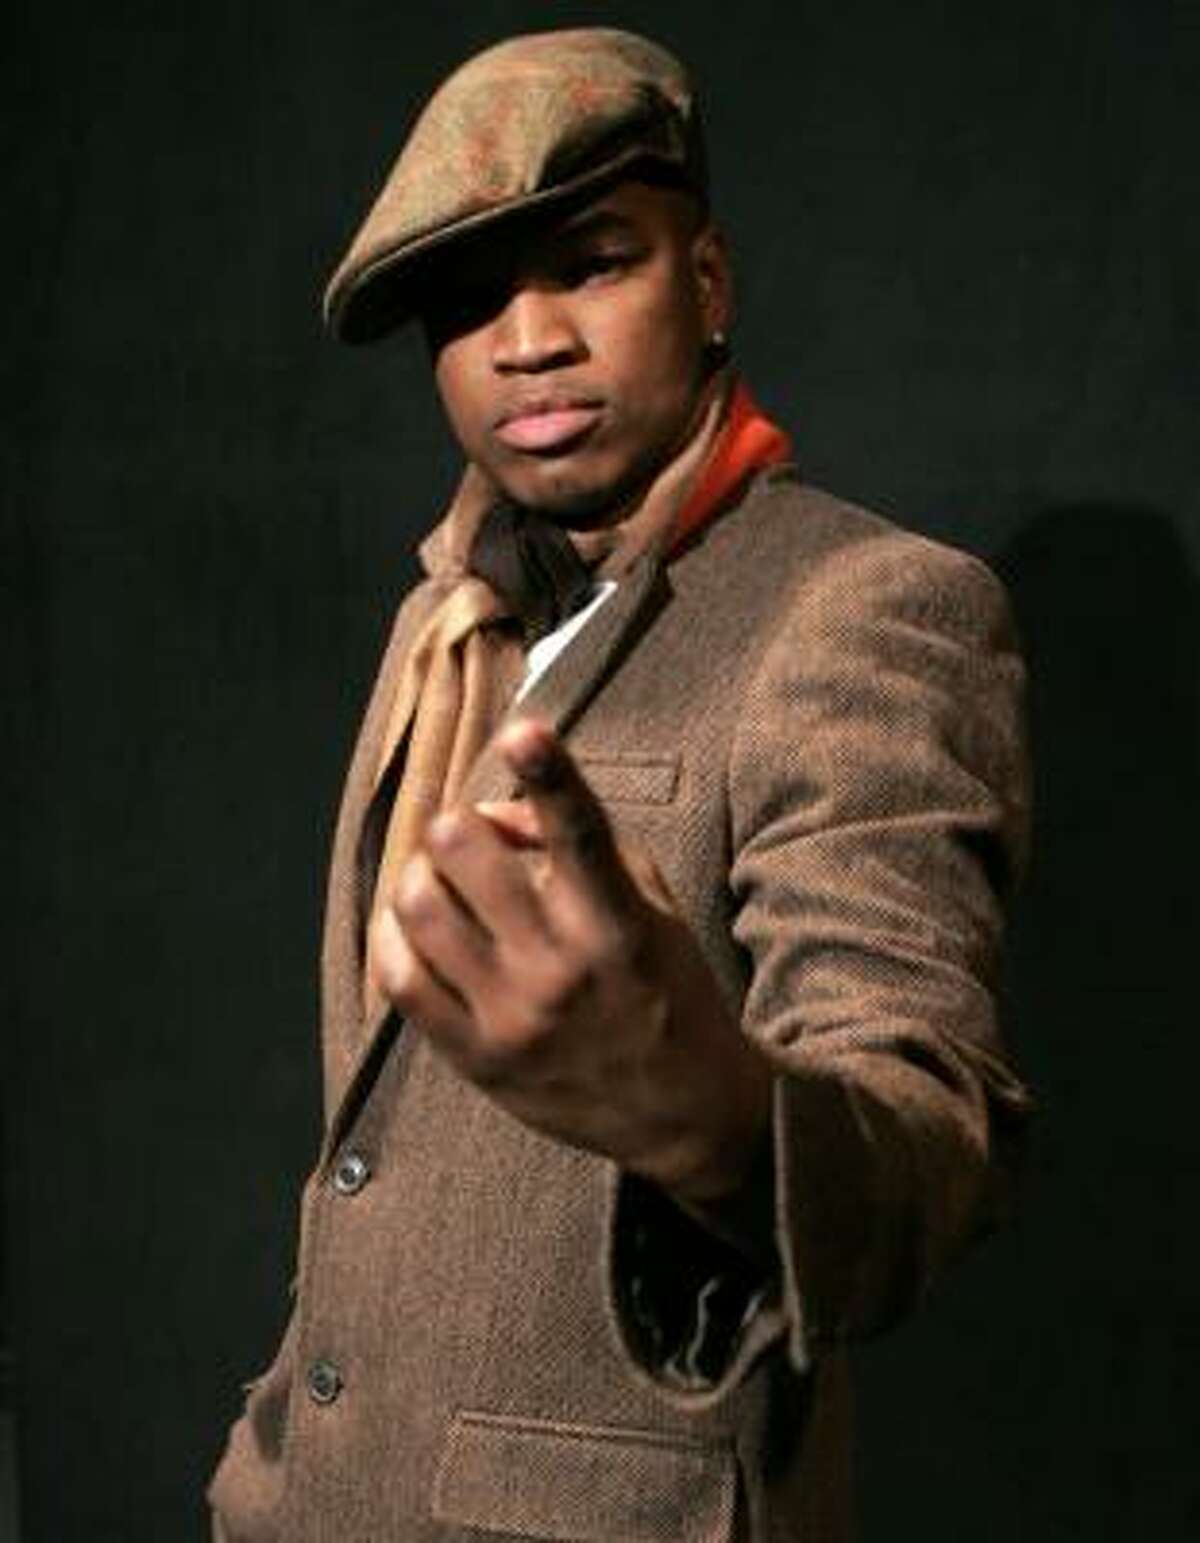 Singer/songwriter Ne-Yo has written hits for Mario Vazquez and Paula DeAnda. He said he would try the Spanish-language market "if I could pull it off by sounding authentic."